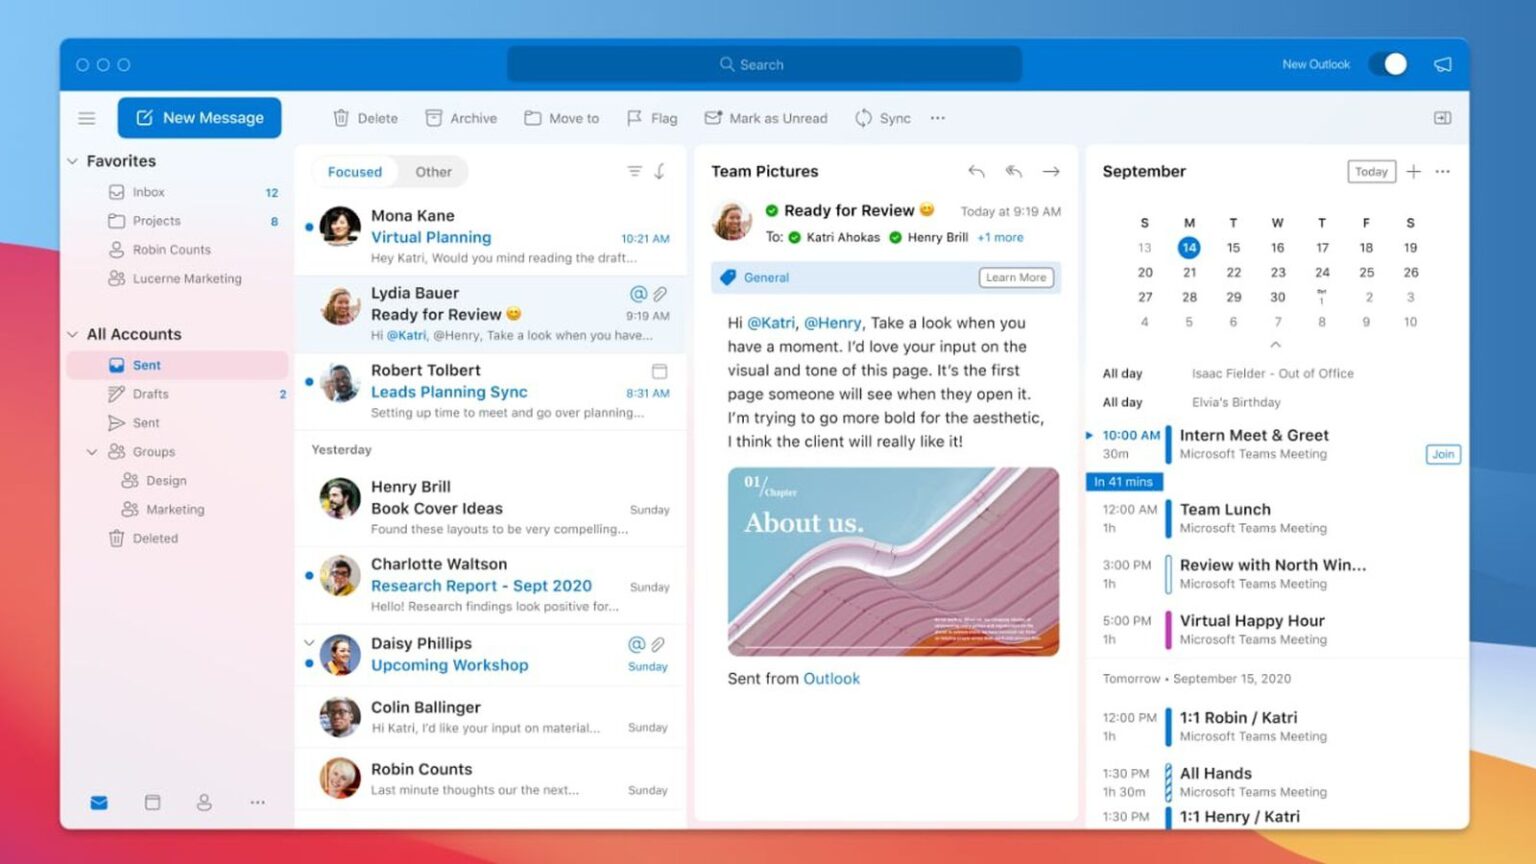 Redesign of Outlook for Mac and Windows